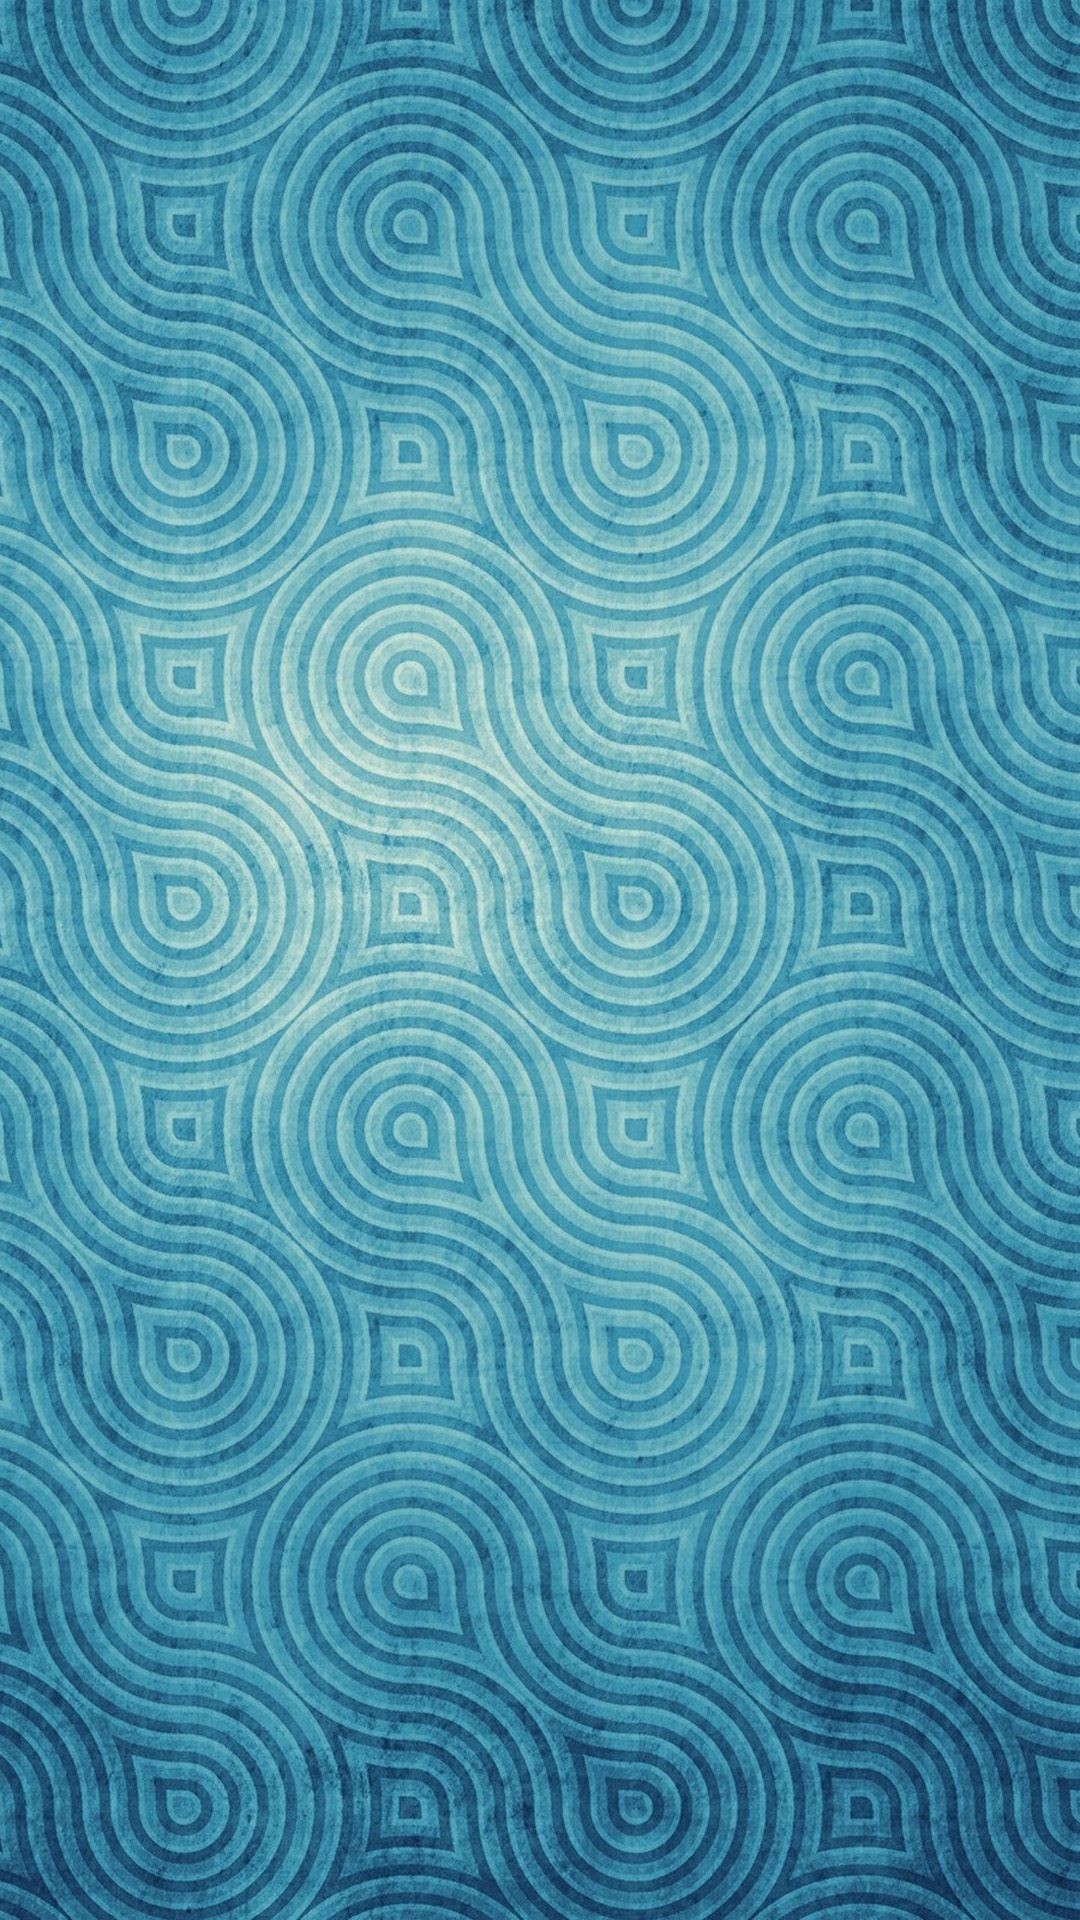 1080x1920 iPhoneWallpapers Blue Patterns